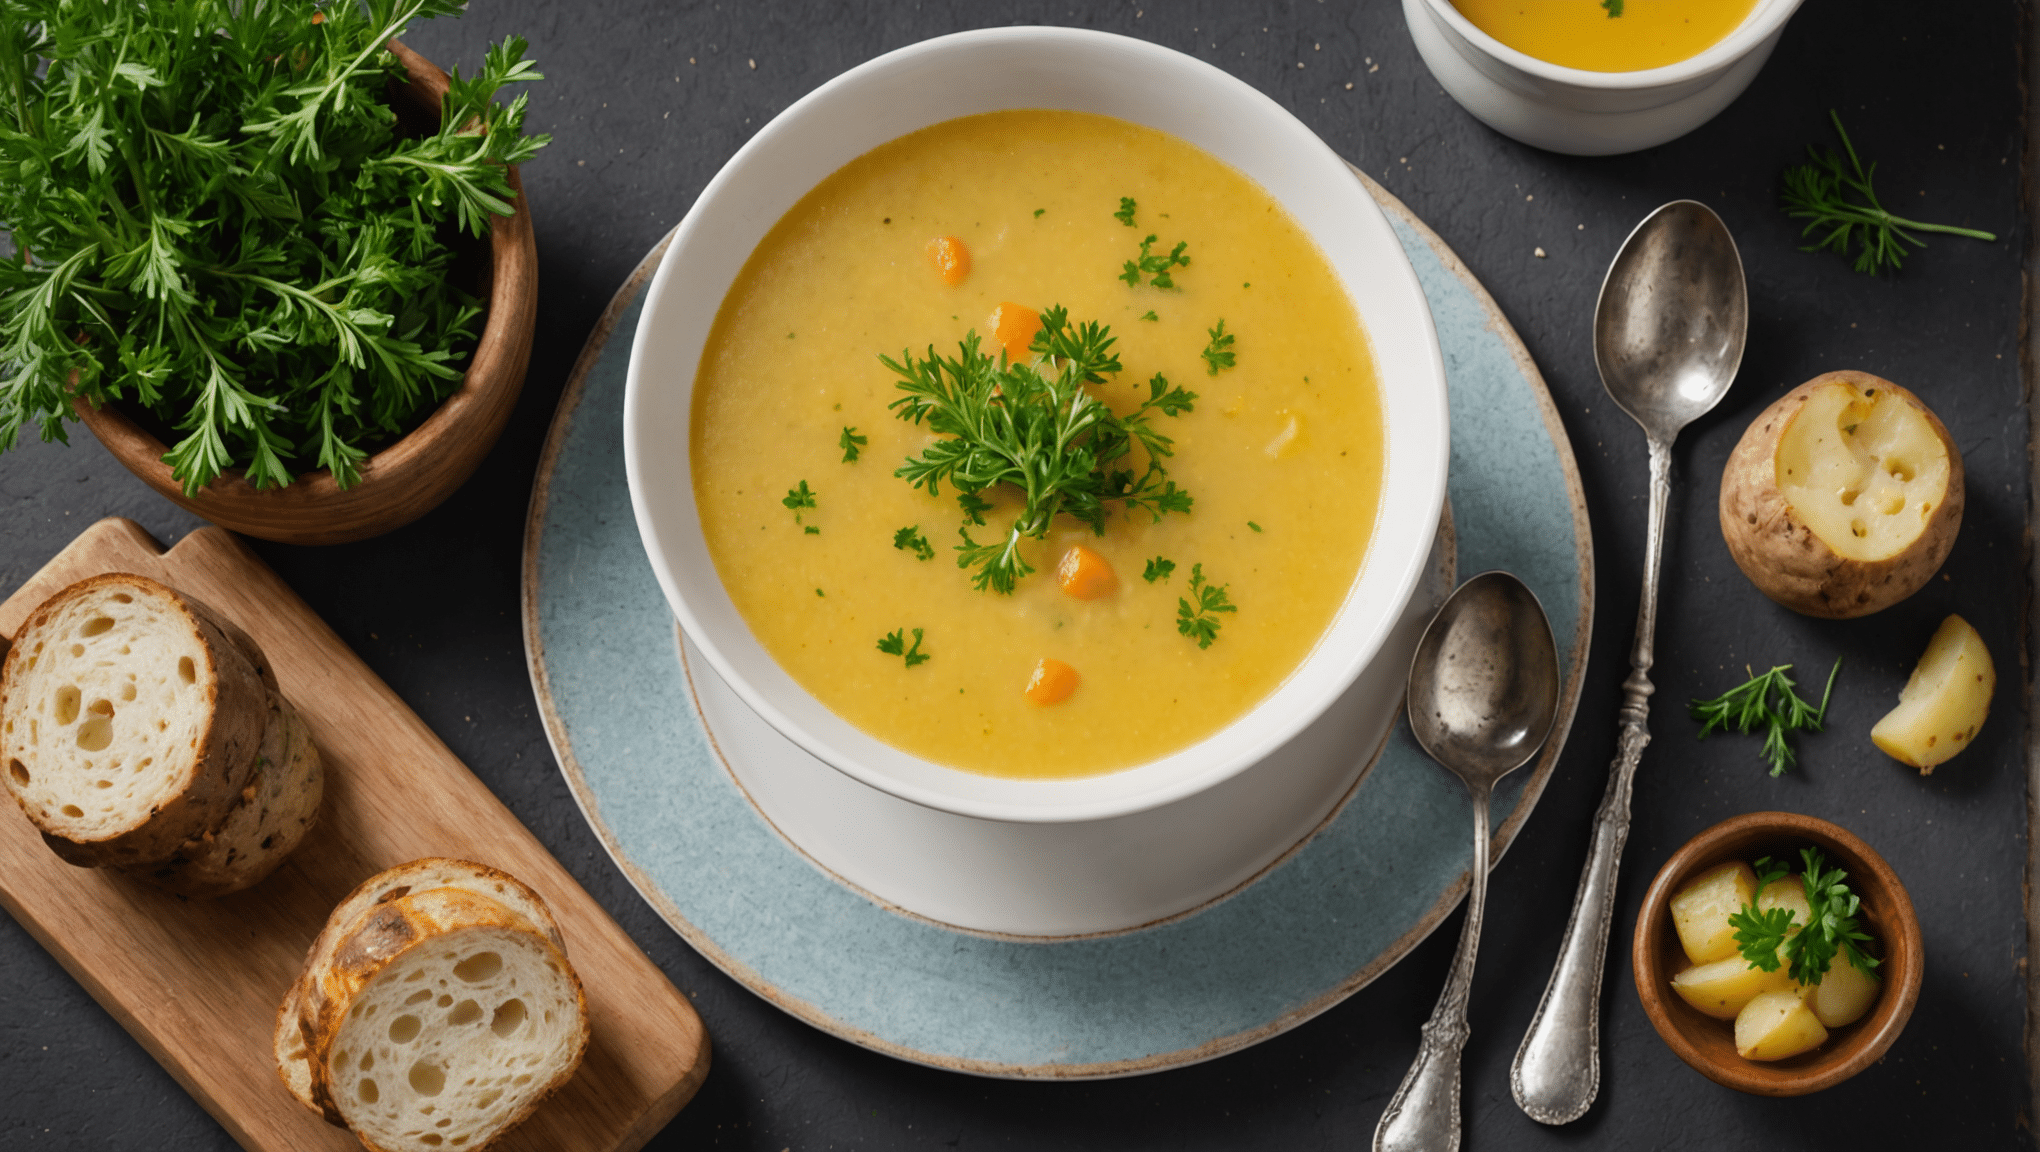 Wormwood and Potato Soup: A hearty soup made with Wormwood, potatoes, and a vegetable broth